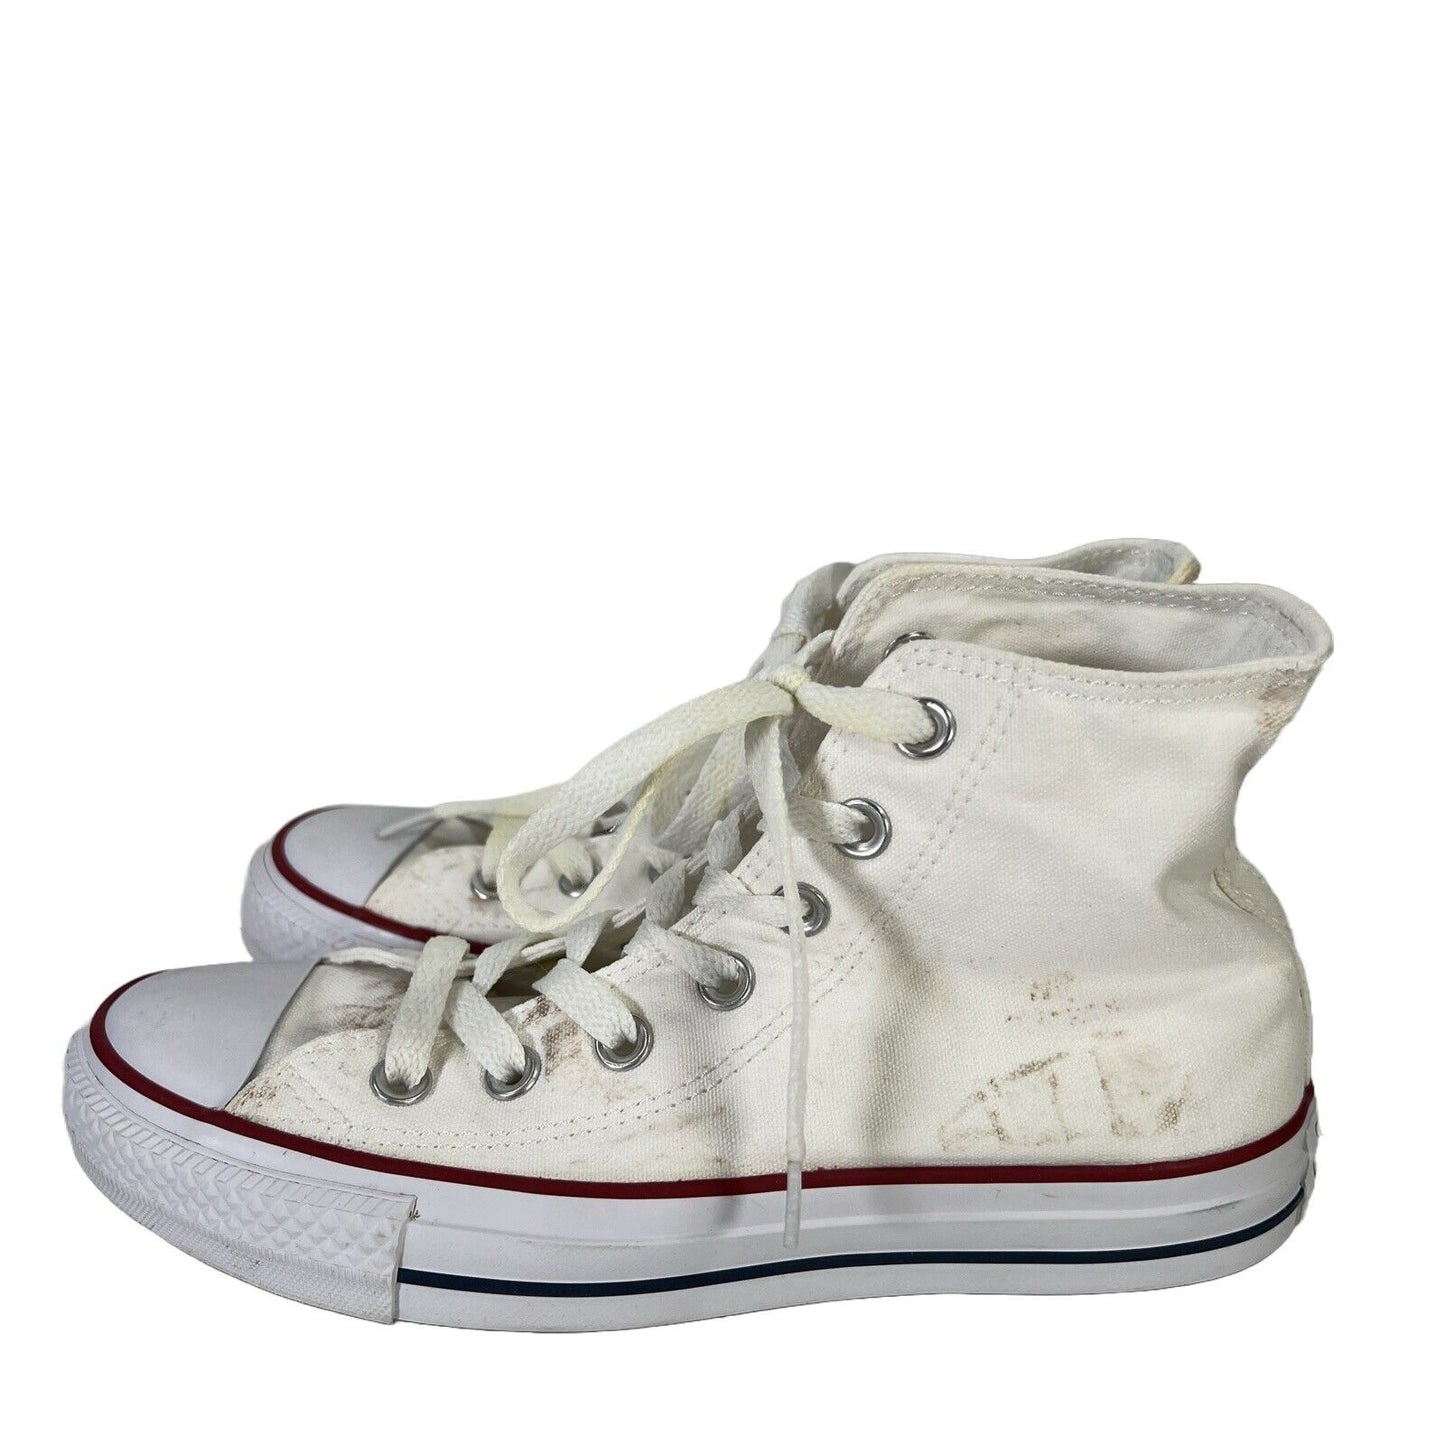 Converse Women's White Lace Up Canvas High Top Sneakers - 6.5